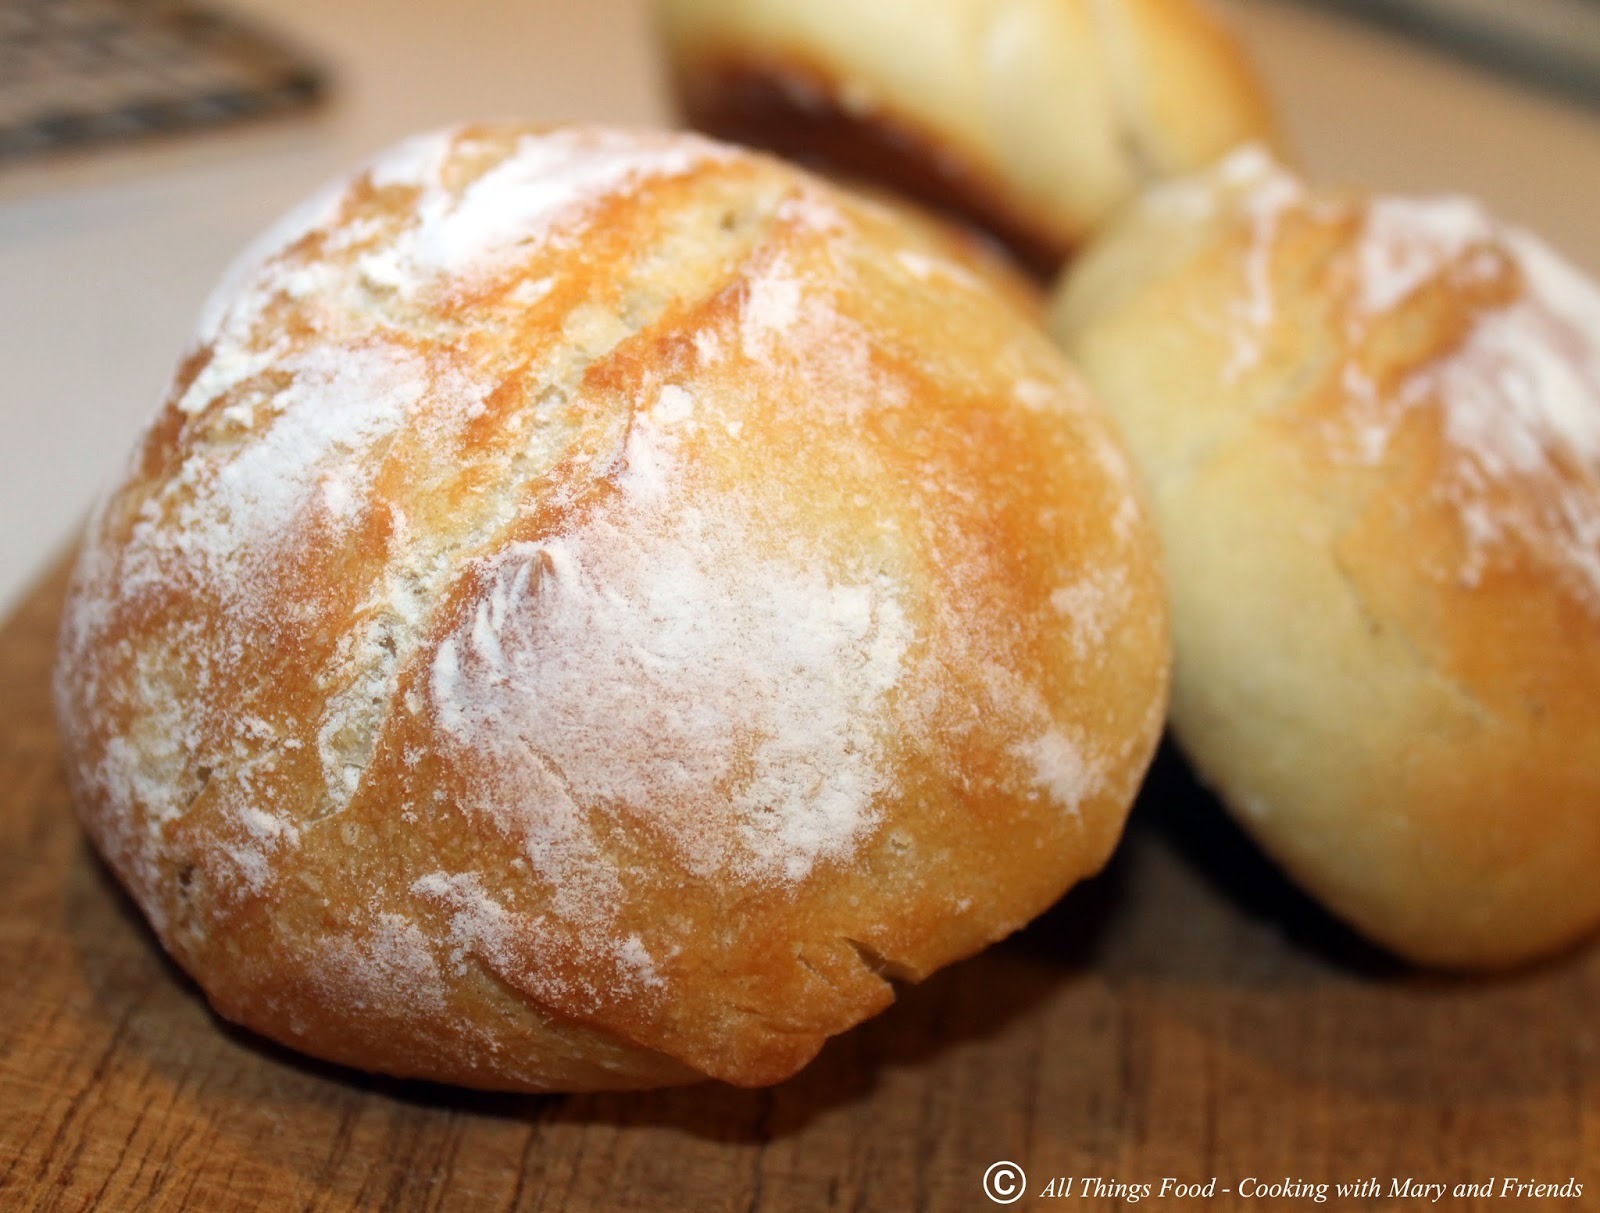 Cooking With Mary and Friends: German Brötchen